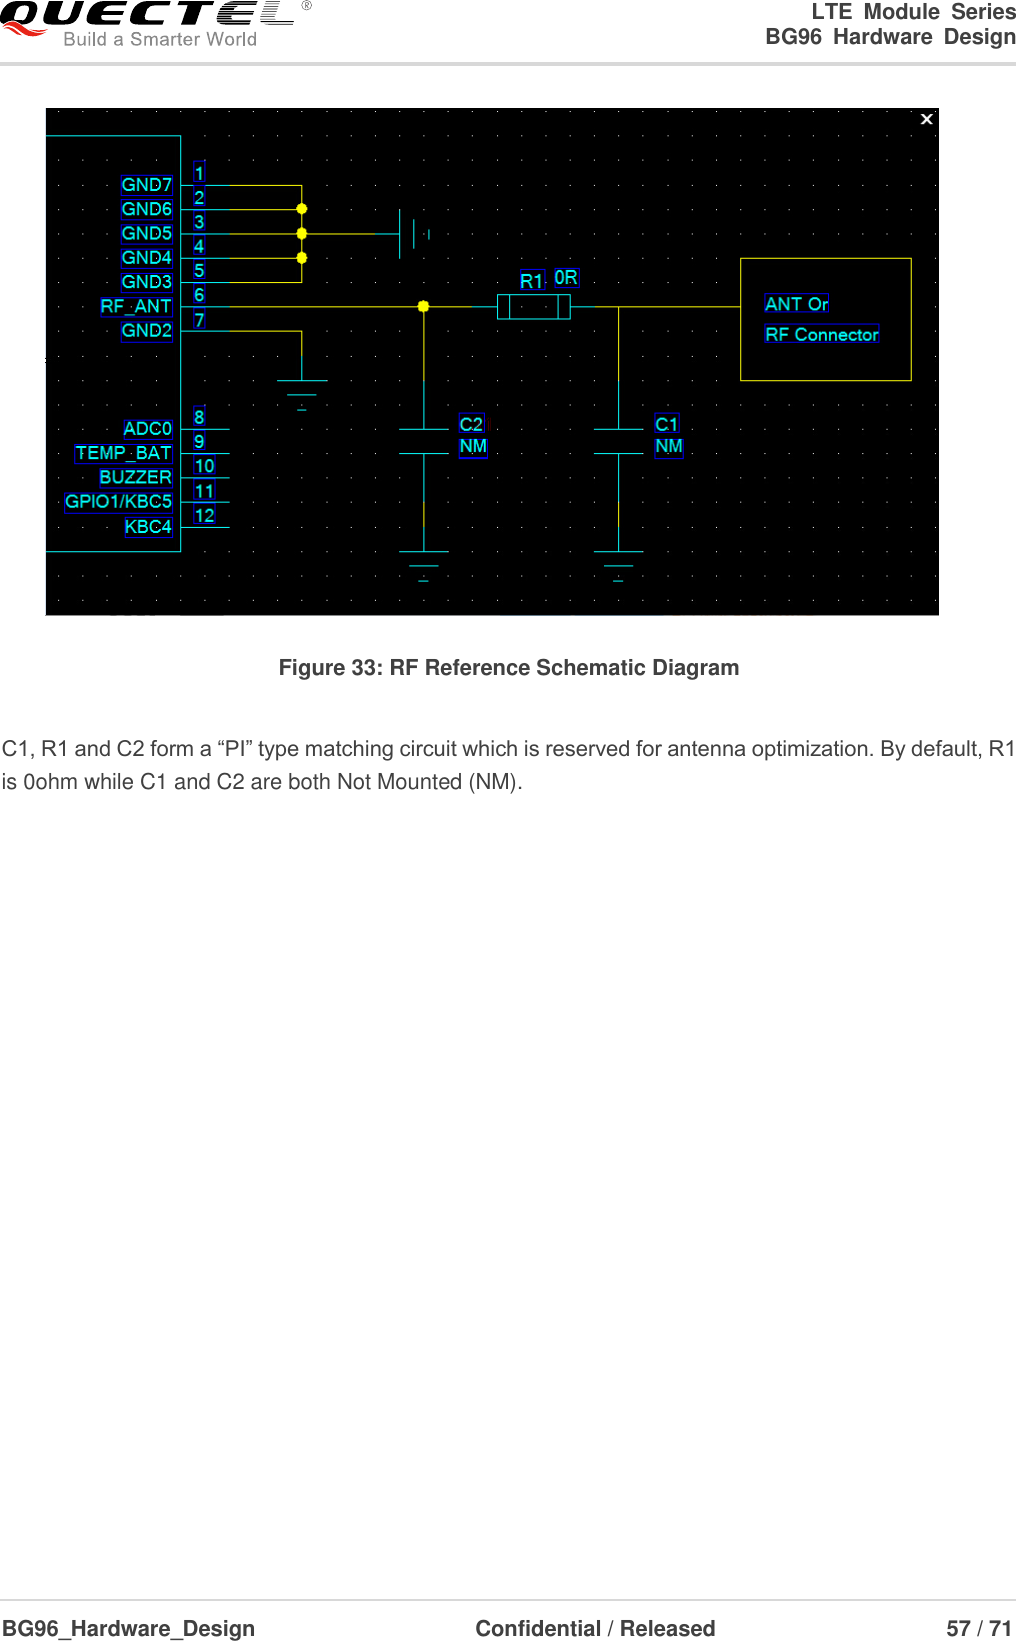 LTE  Module  Series                                                  BG96  Hardware  Design  BG96_Hardware_Design                              Confidential / Released                             57 / 71             Figure 33: RF Reference Schematic Diagram  C1, R1 and C2 form a “PI” type matching circuit which is reserved for antenna optimization. By default, R1 is 0ohm while C1 and C2 are both Not Mounted (NM).    